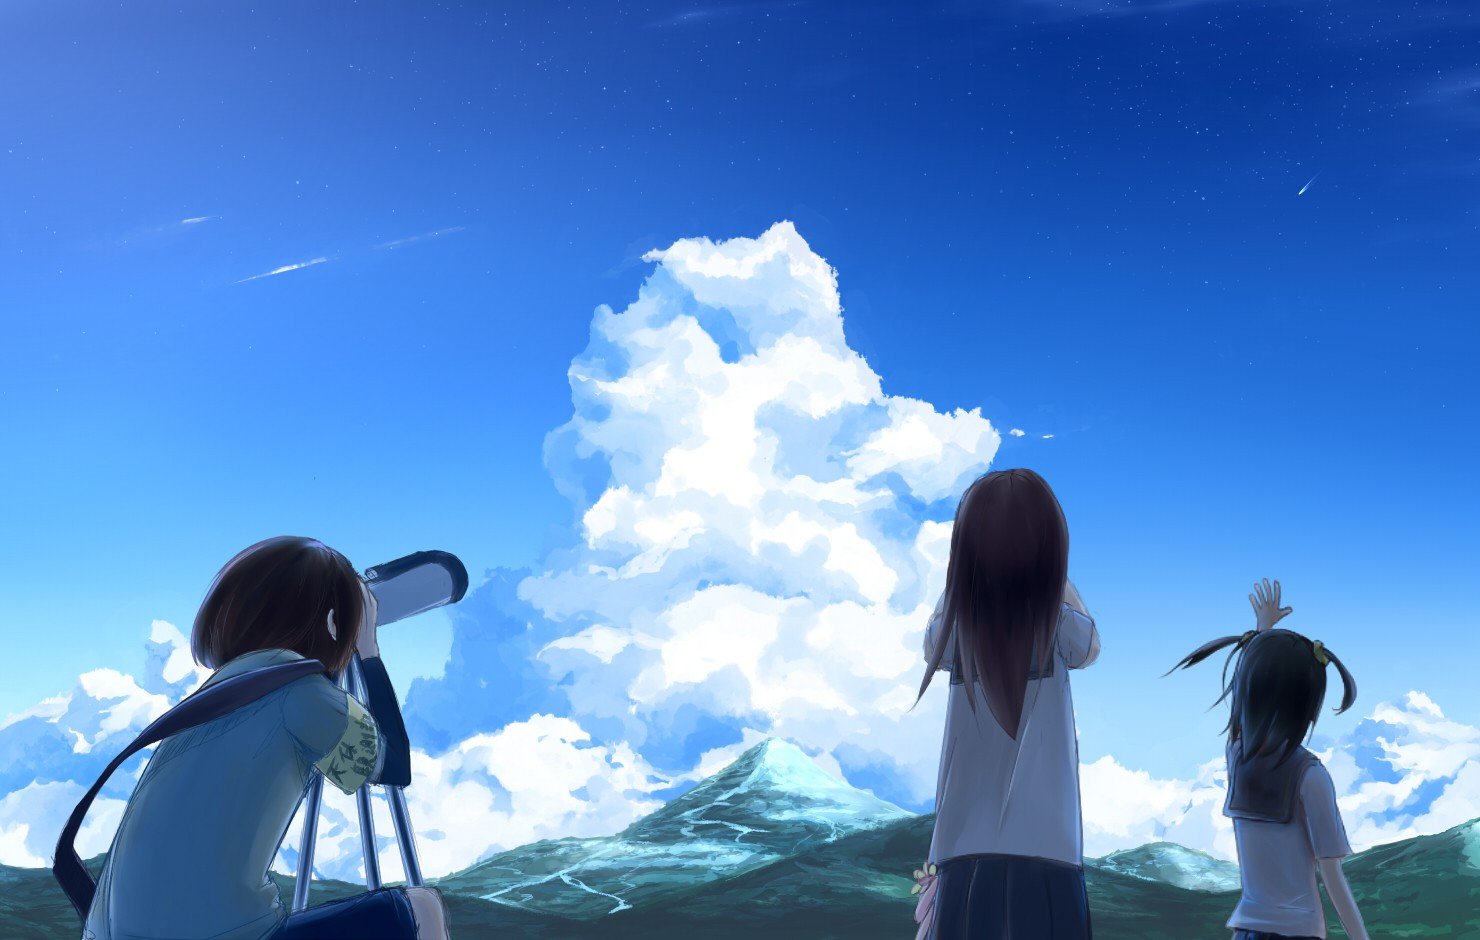 brunettes, Mountains, Clouds, Landscapes, Back, School, Uniforms, Schoolgirls, Skirts, Long, Hair, Short, Hair, Twintails, Scenic, Skyscapes, Anime, Girls, Armbands, Hair, Ornaments, Black, Hair, Skies, Three, G Wallpaper